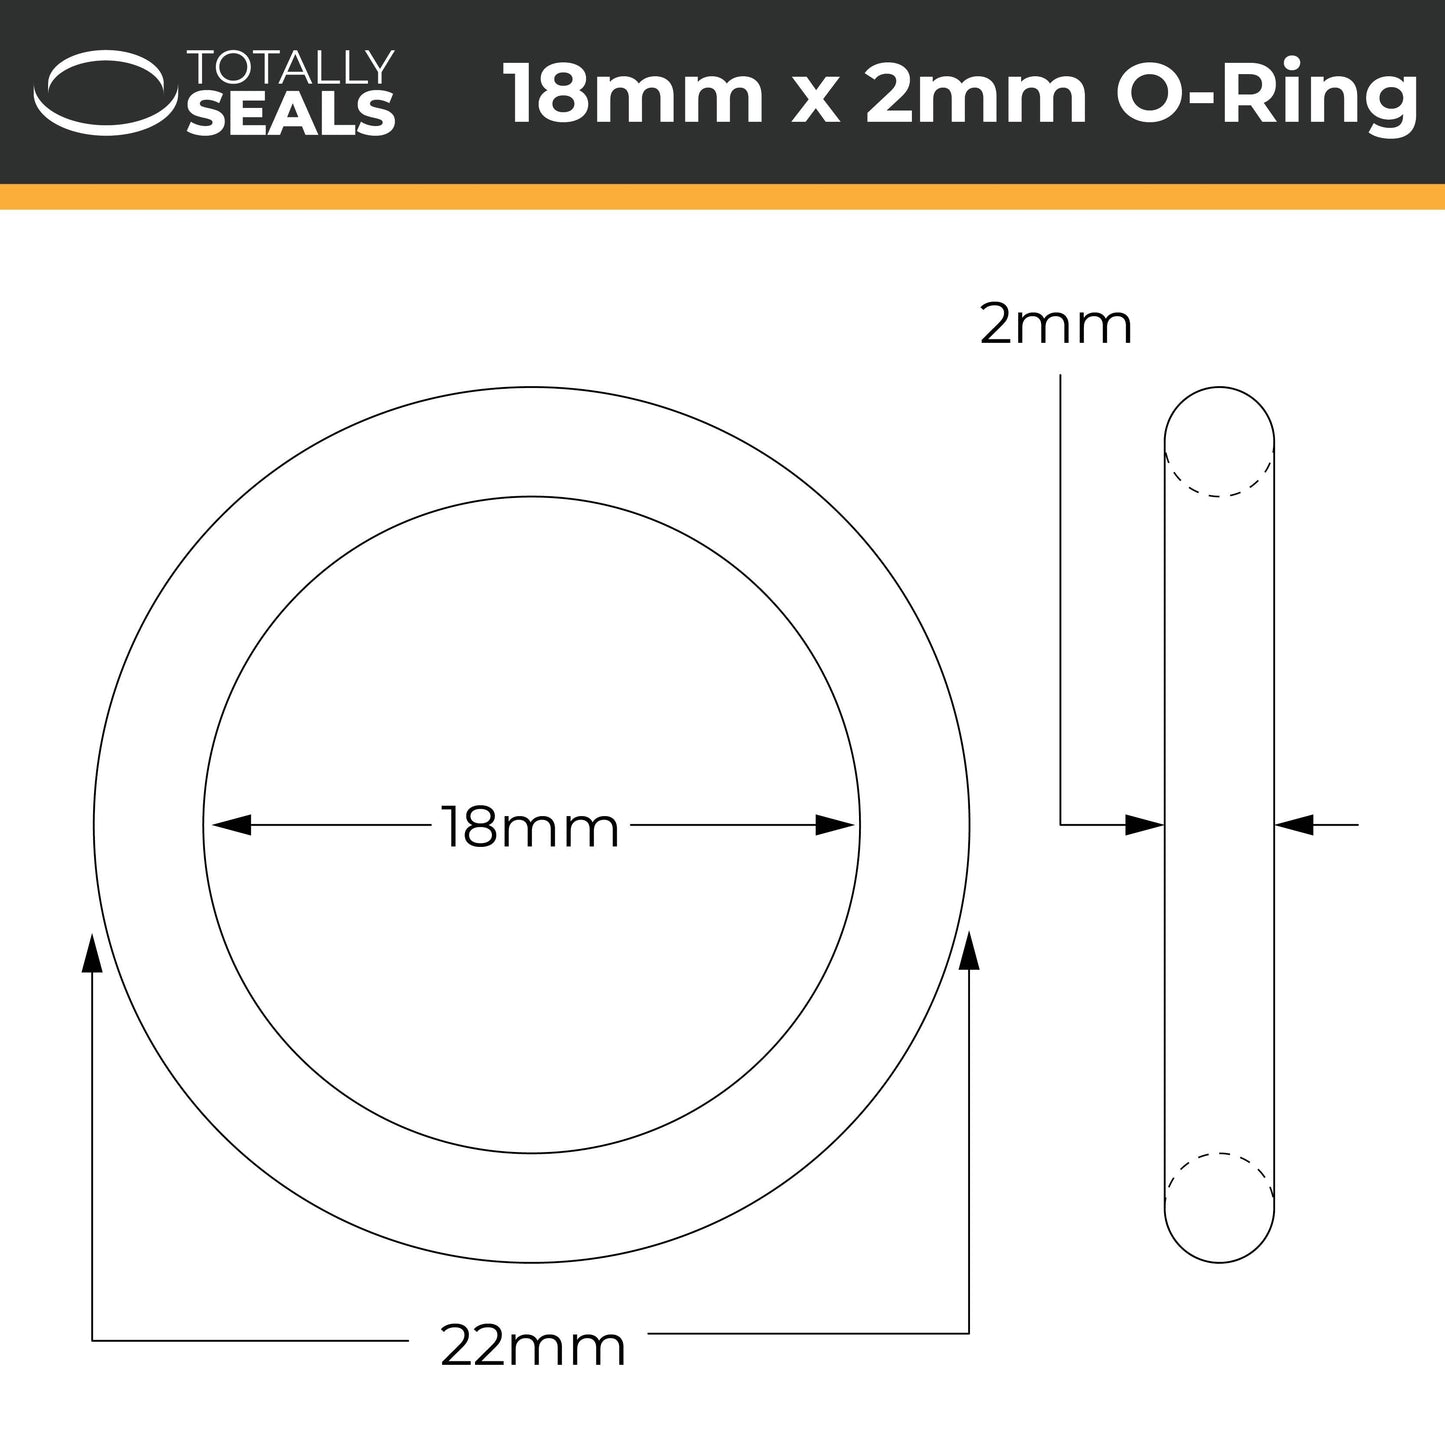 18mm x 2mm (22mm OD) Silicone O-Rings - Totally Seals®